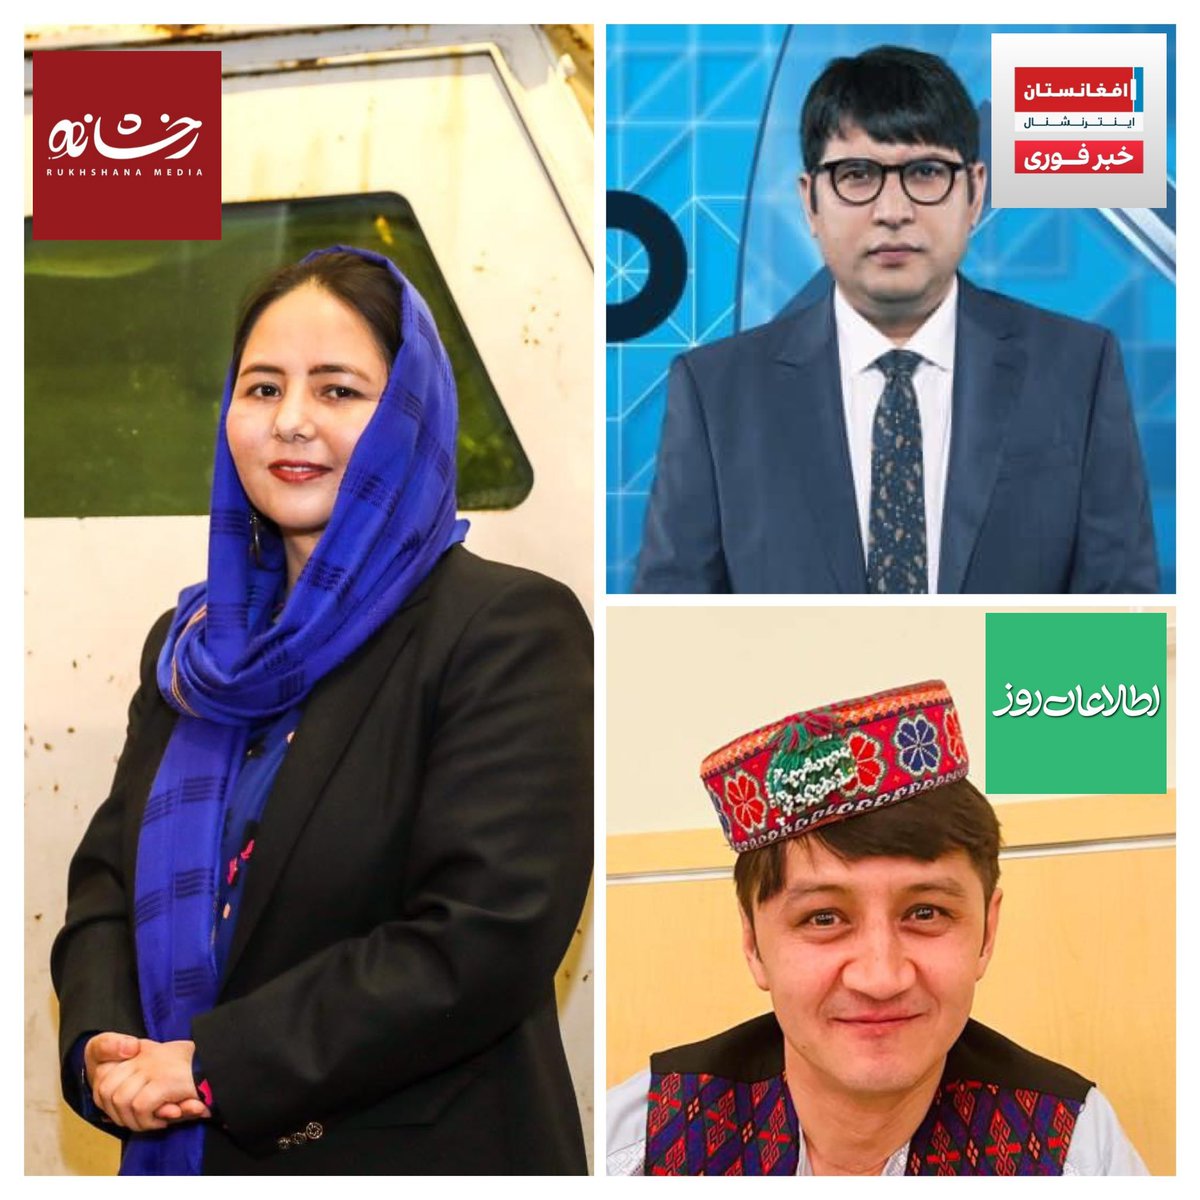 Some Hazaras have sold themselves to anti-Tajik American pursuits in return for managerial positions in media.

The end goal is always the same, more Hazaras will get killed by Afghan nationalism, while Hazara stooges are used to attack the Tajiks defeating the taliban.